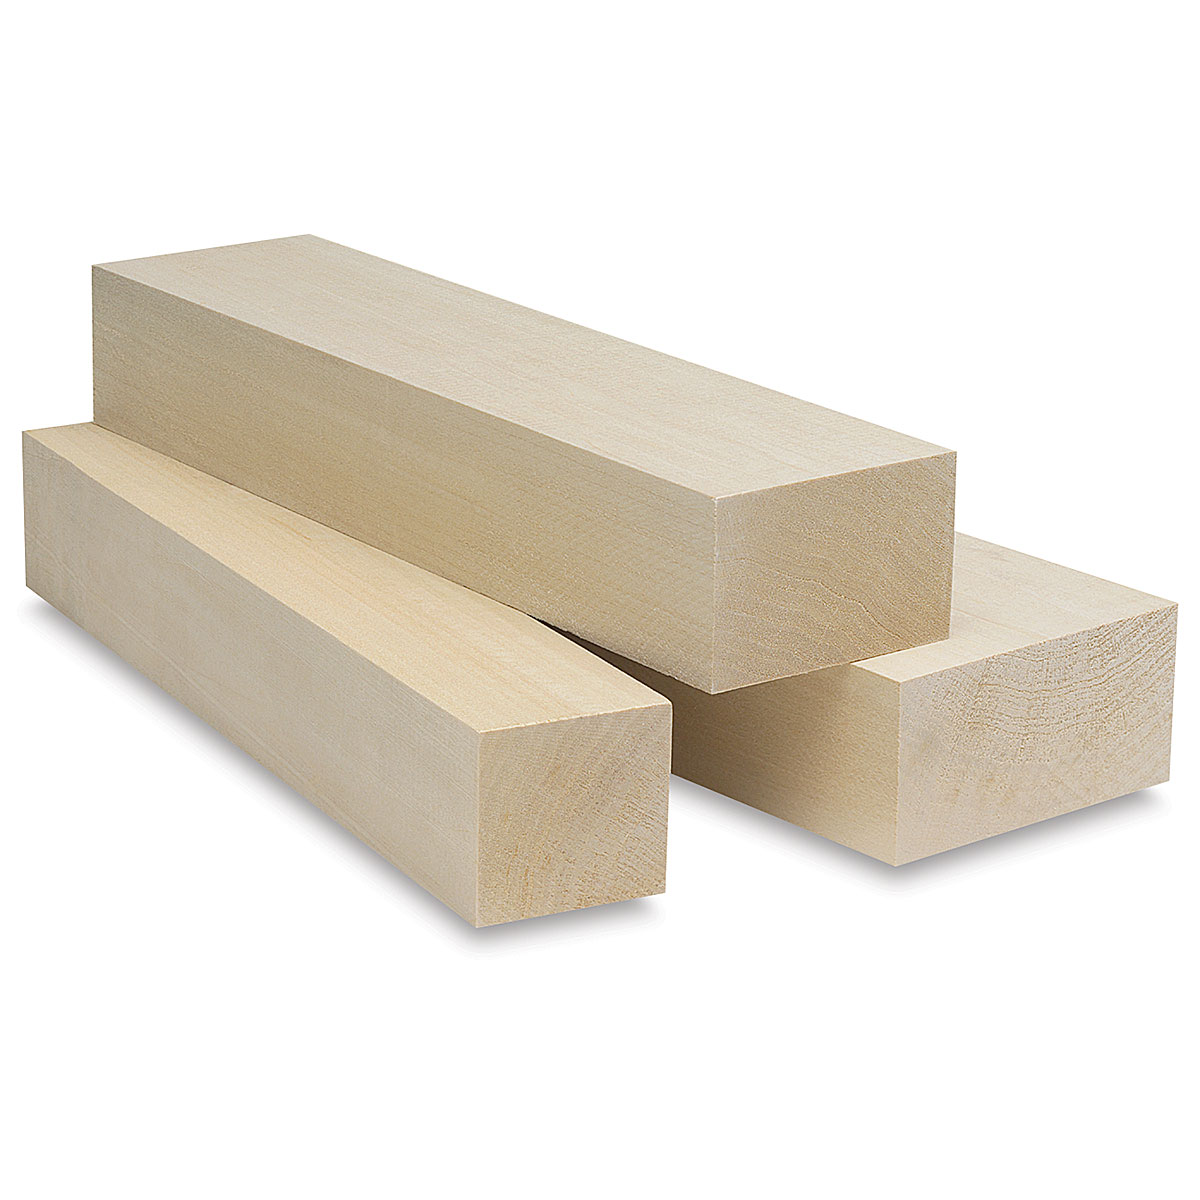 2 Inch Basswood Carving Blocks - 8 Inch Lengths